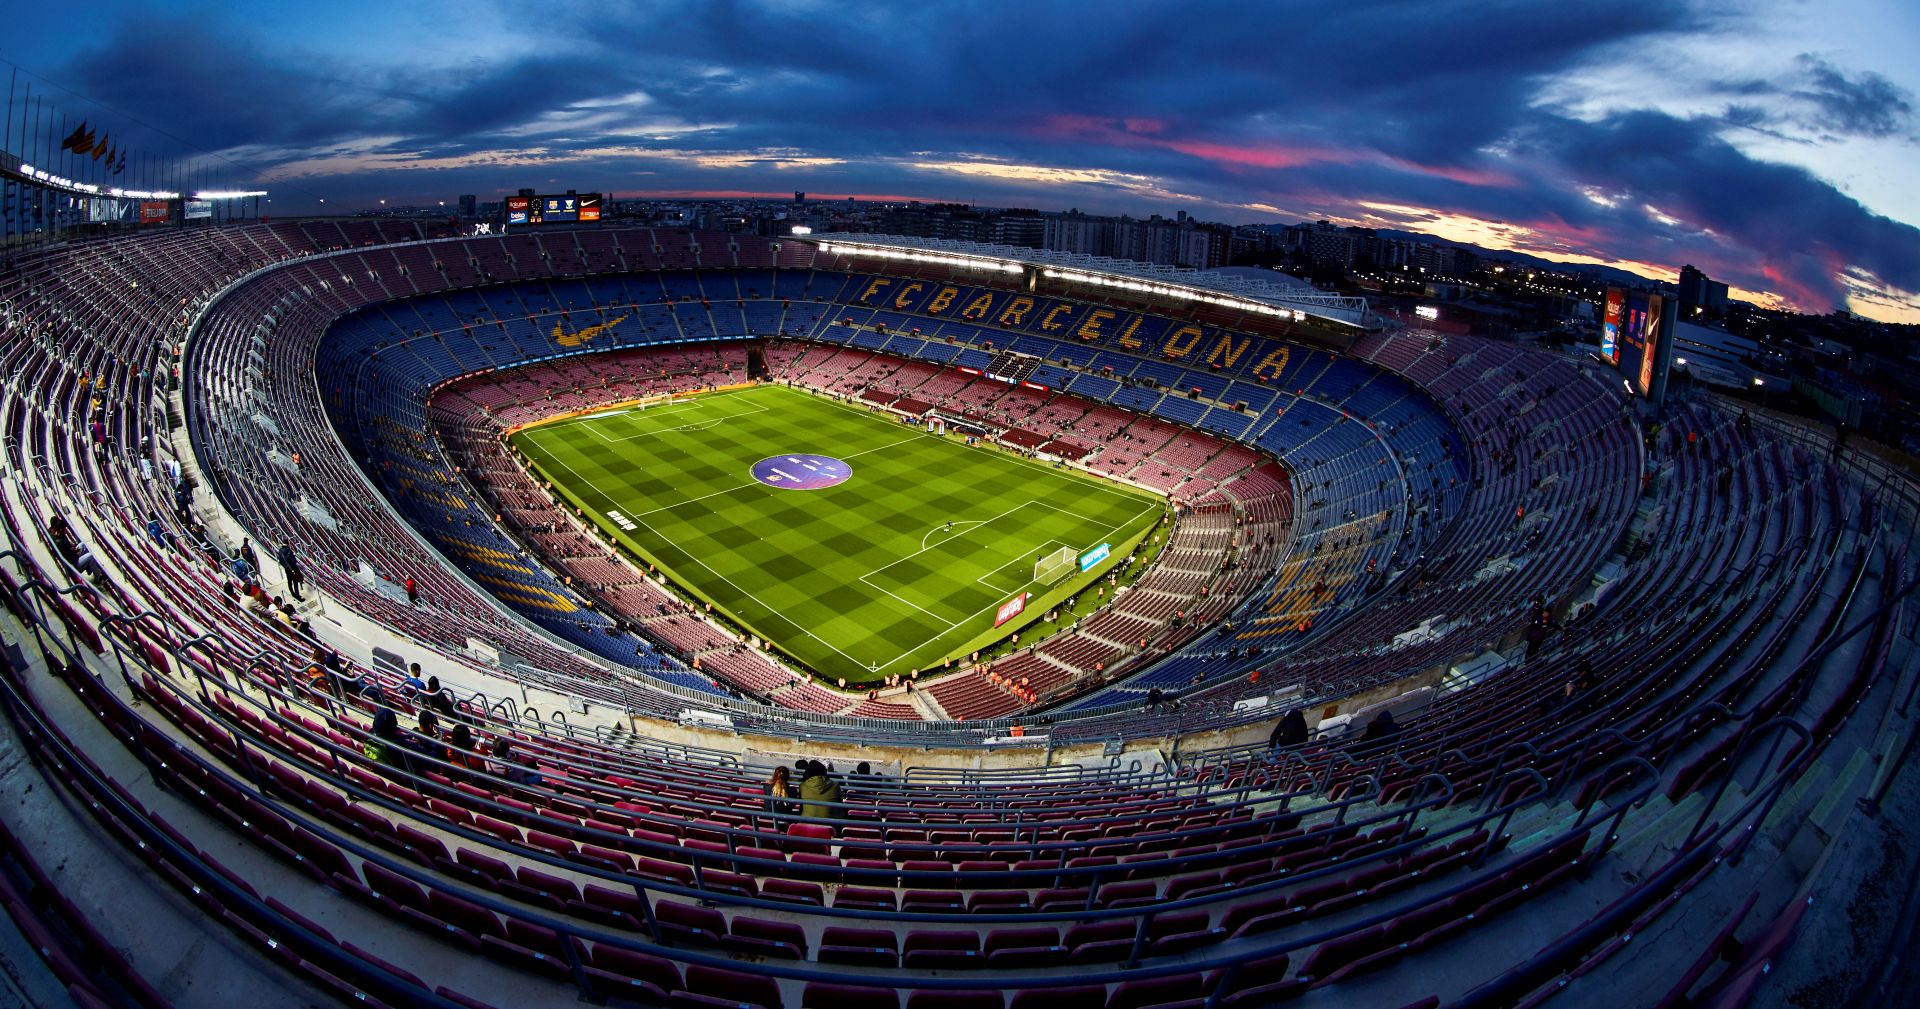 epa08282882 (FILE) - General view of the Camp Nou stadium before the Spanish King's Cup round of 16 soccer match between FC Barcelona and CD Leganes in Barcelona, Spain, 30 January 2020 (re-issued on 10 March 2020). The UEFA Champions League round of 16 soccer match between FC Barcelona and SSC Napoli on 18 March 2020 will be played behind closed doors in order to reduce mass gatherings amid the coronavirus outbreak, the Spanish La Liga soccer club confirmed on 10 March 2020.  EPA/ALEJANDRO GARCIA *** Local Caption *** 55835091